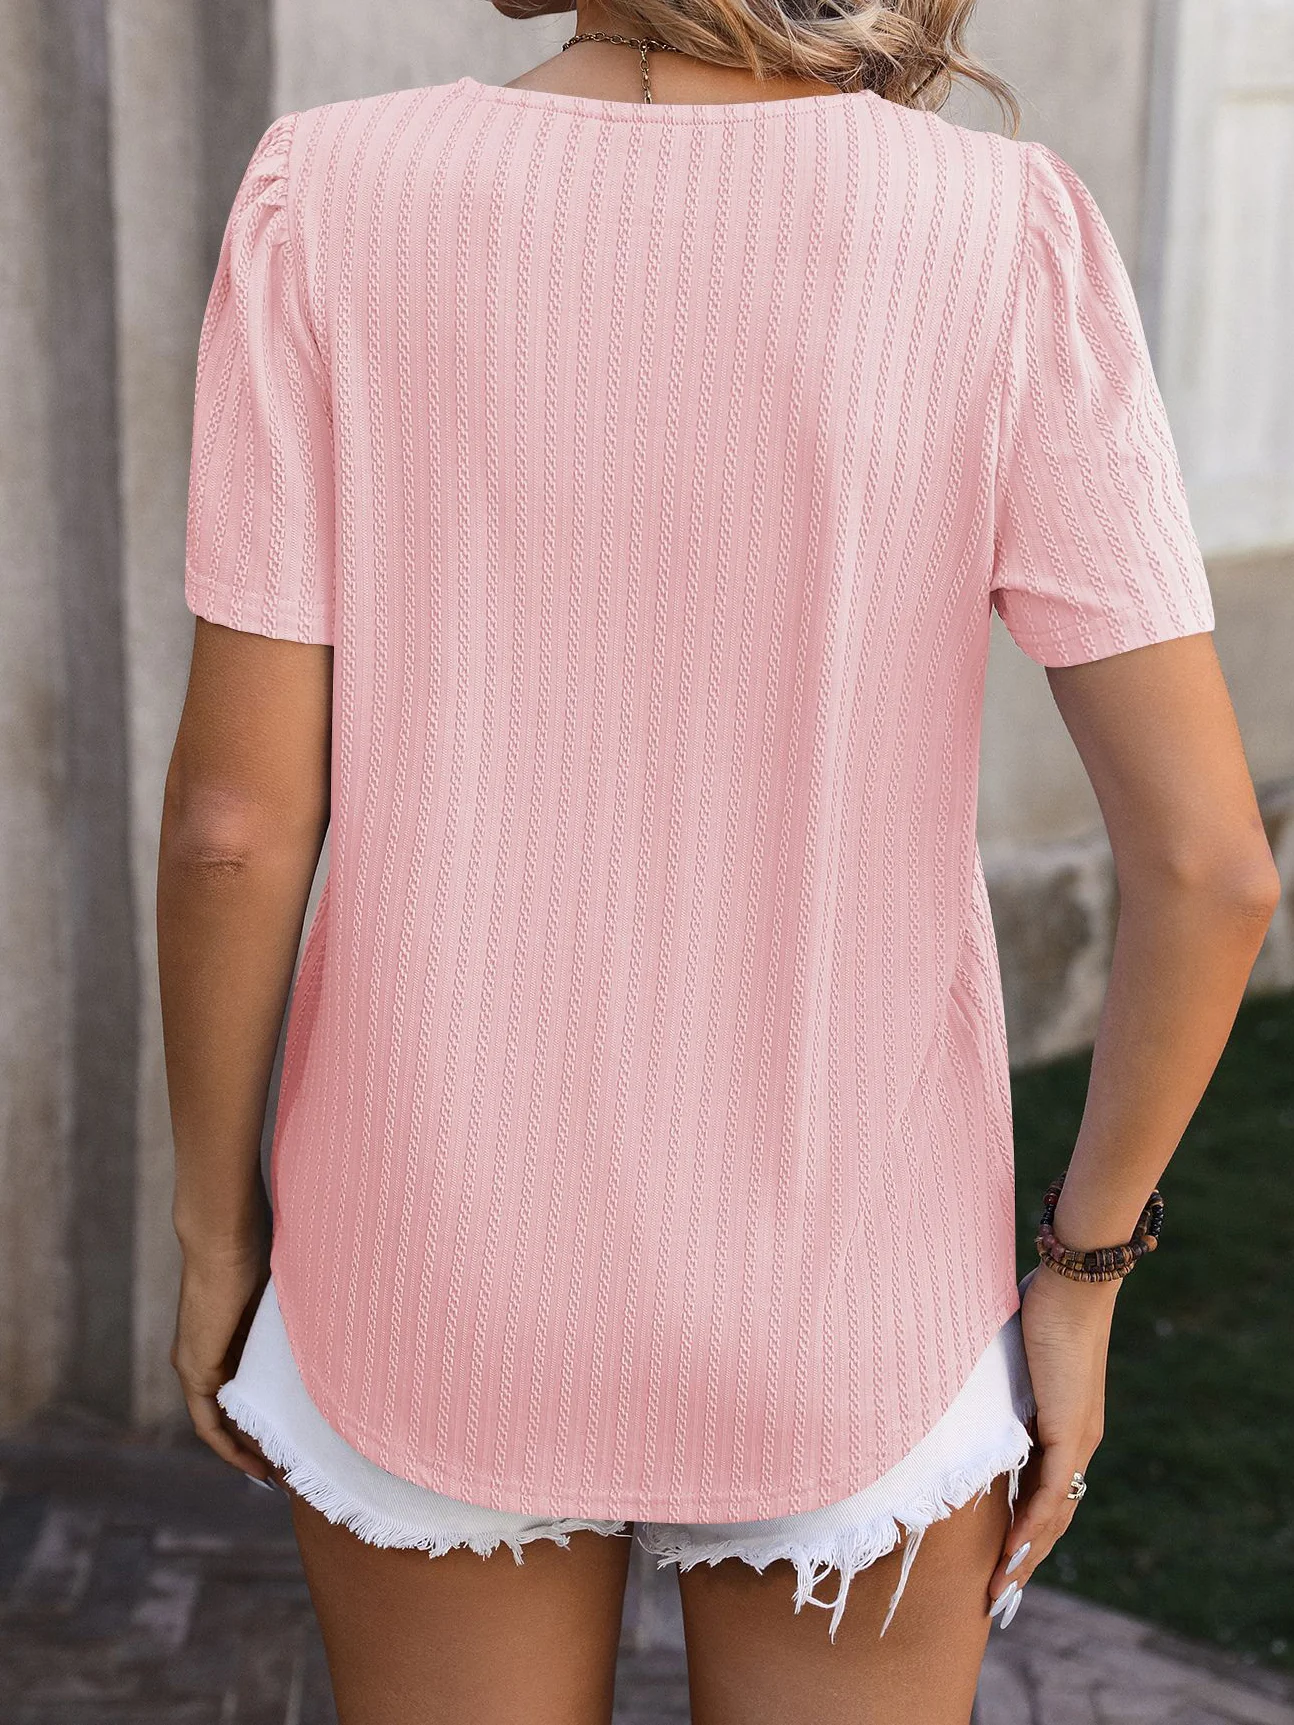 Casual Loose Knitted Square Neck Shirt